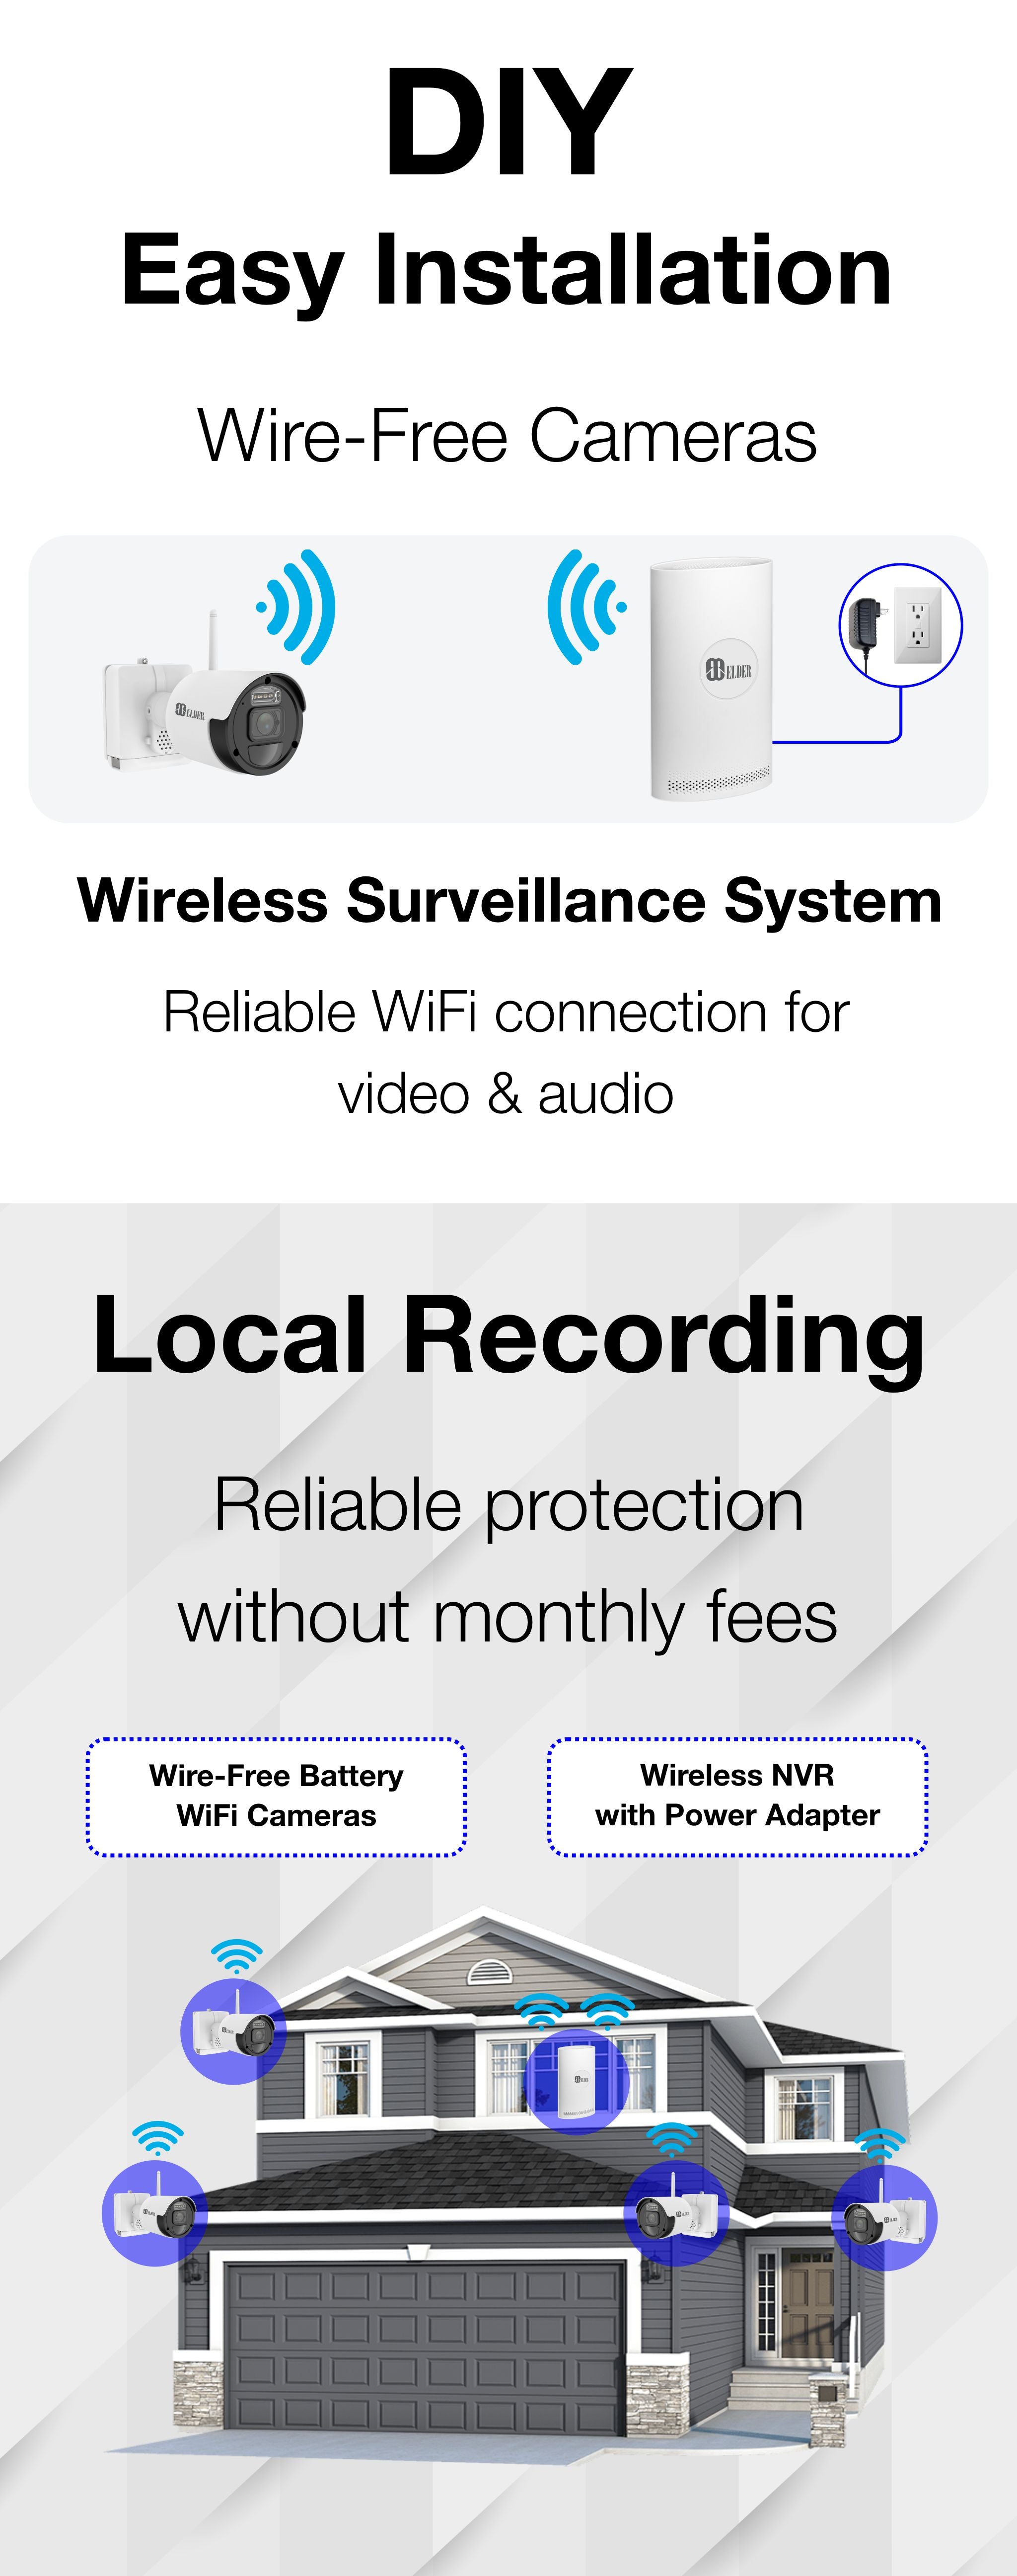 Elder wireless security camera system is a DIY wire-free surveillance camera system battery